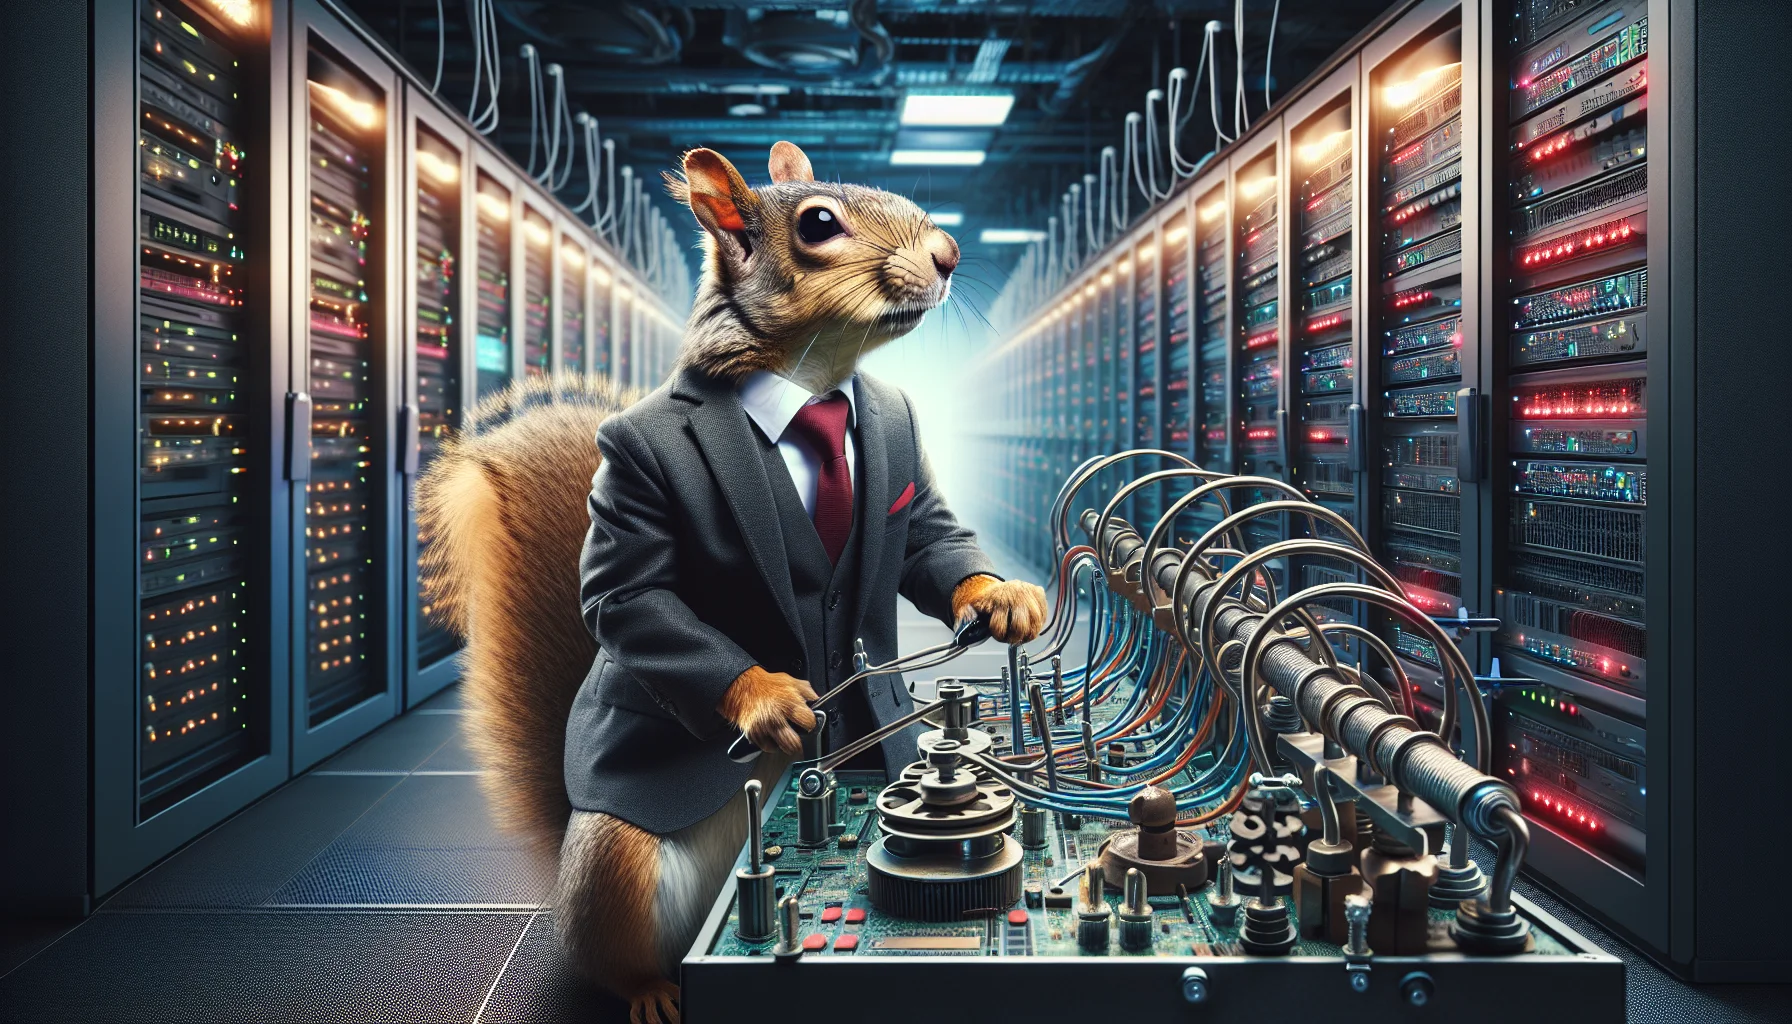 Generate an entertaining and realistic image featuring an alternative to a web hosting control panel. Picture a squirrel, dressed smartly in a business suit, using a complex system of pulleys and levers to manipulate a website. This creative representation of the control panel alternative is set against the backdrop of a bustling web server room filled with glowing screens and humming equipment. The scene is intrinsically amusing, with the squirrel scrabbling around to adjust the various controls effectively, signifying an enjoyable and user-friendly experience.